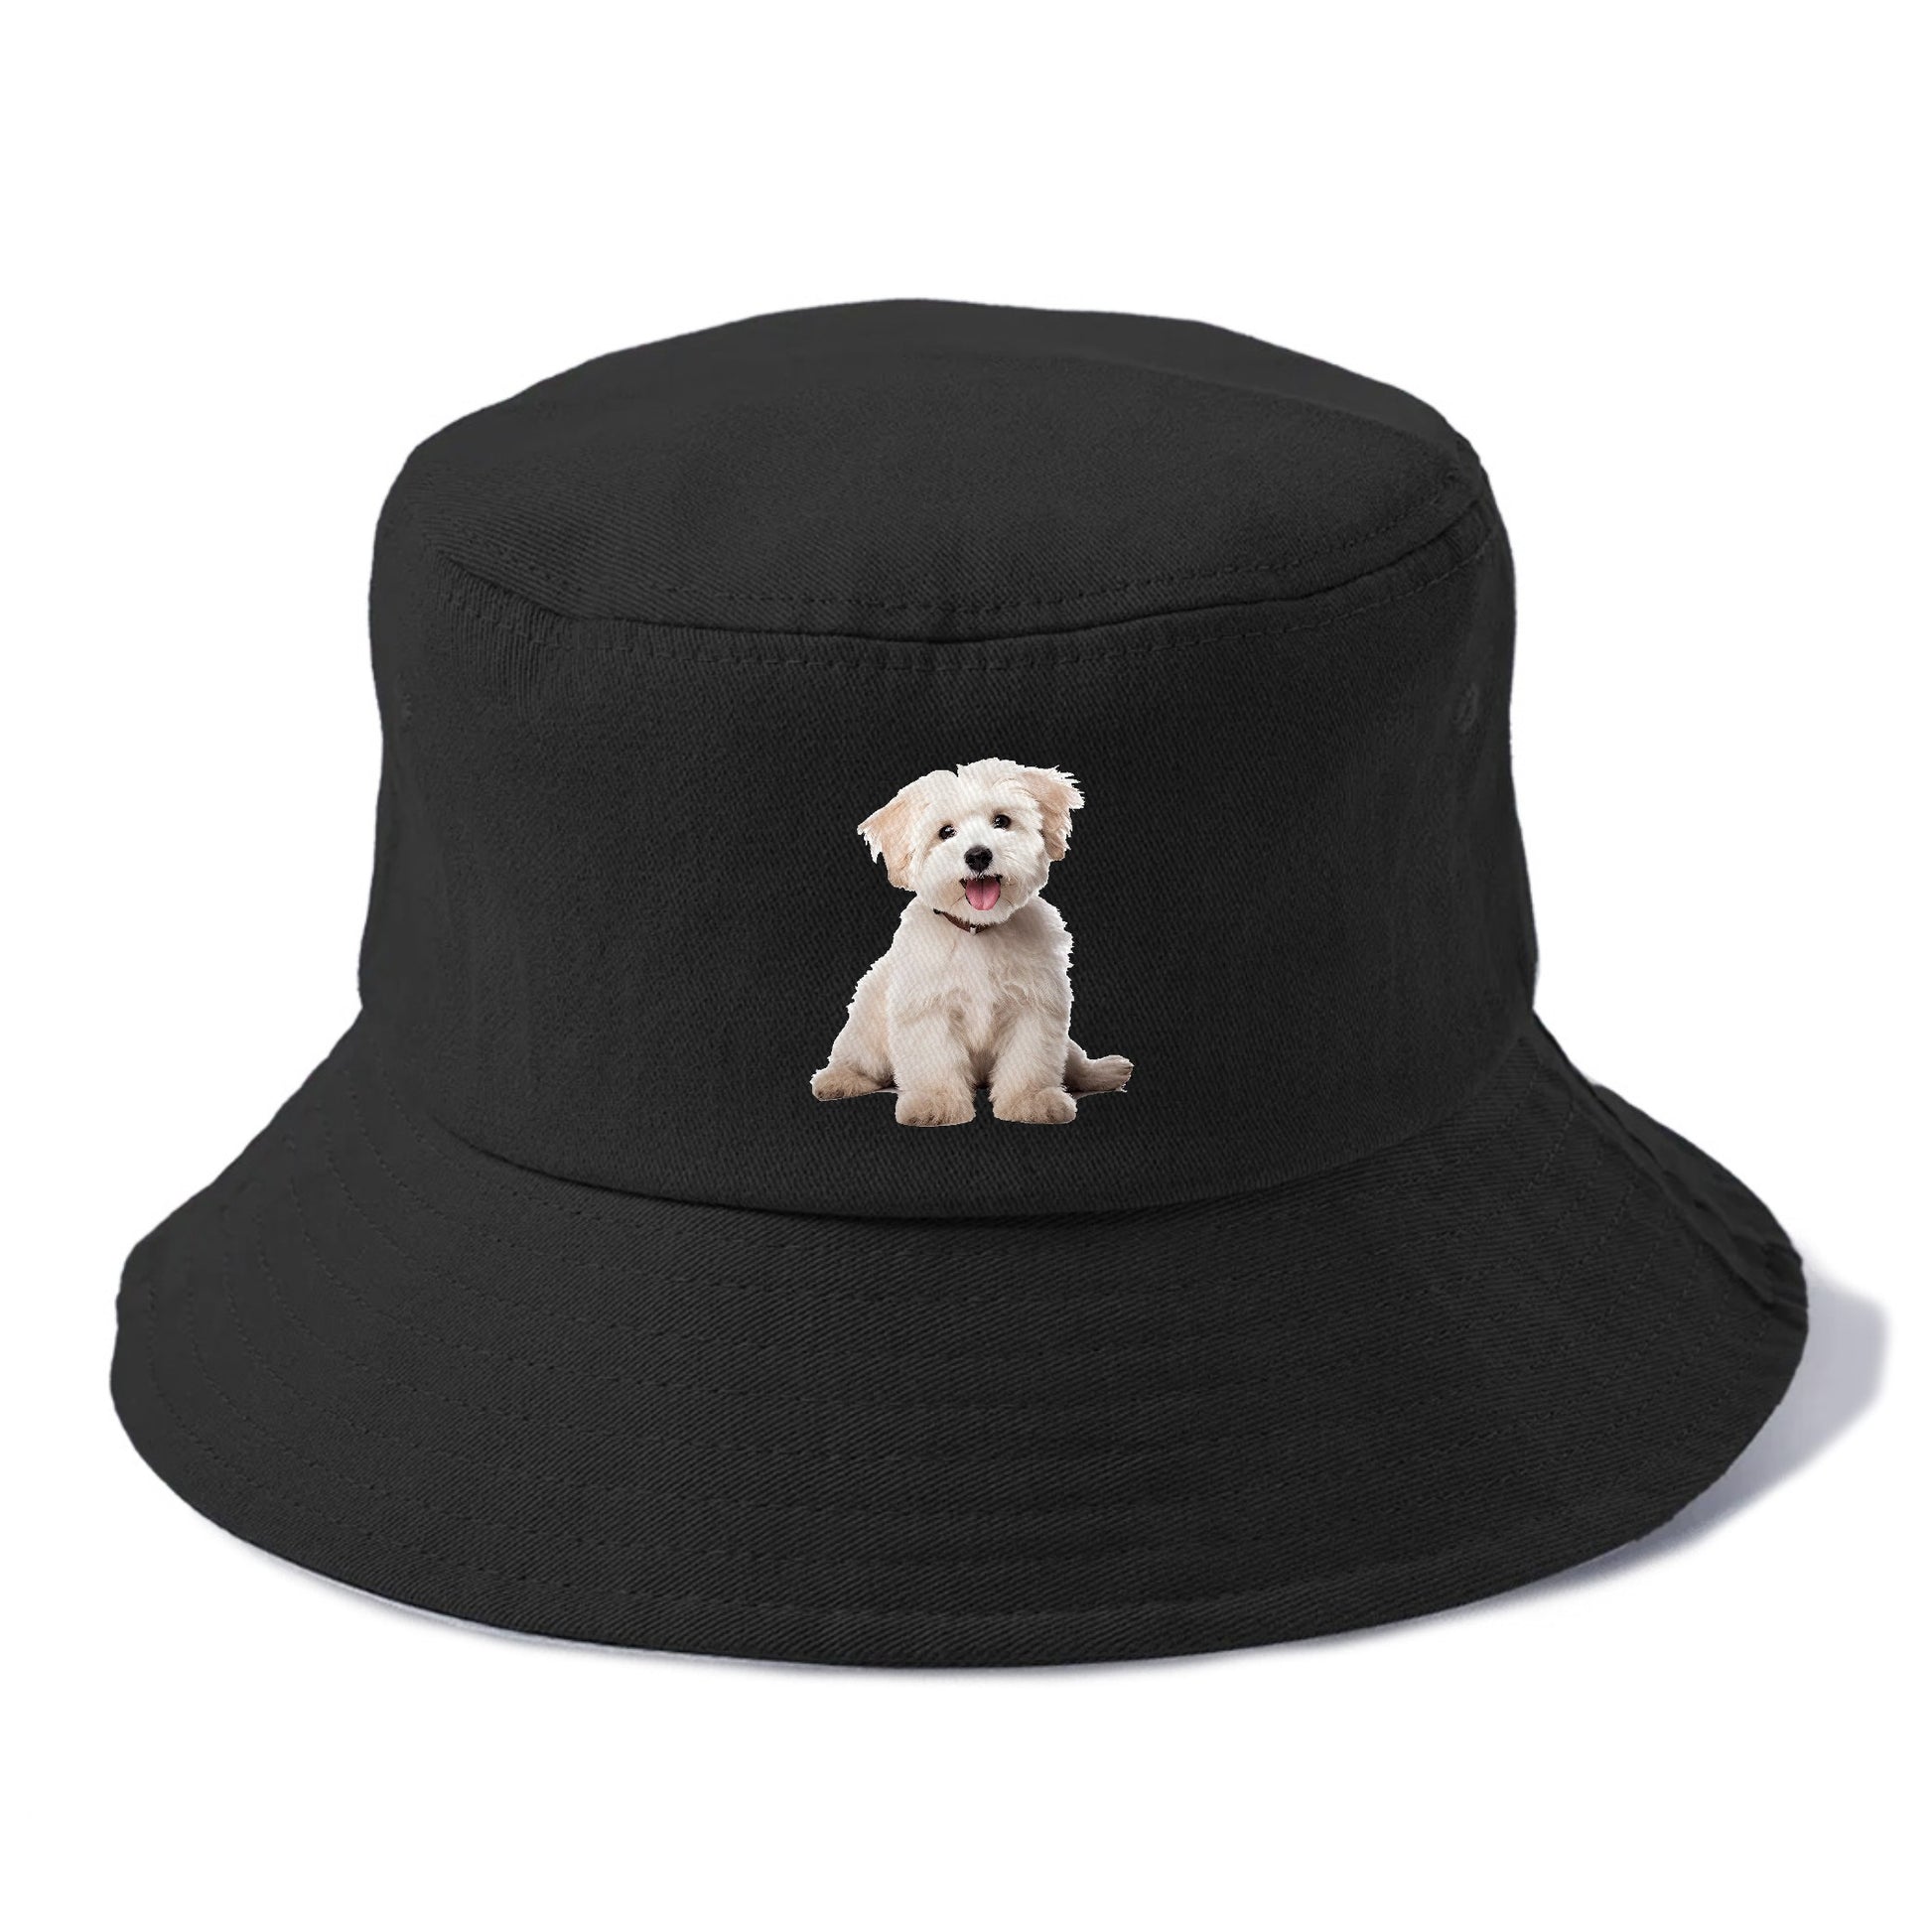 Adorable white puppy Hat